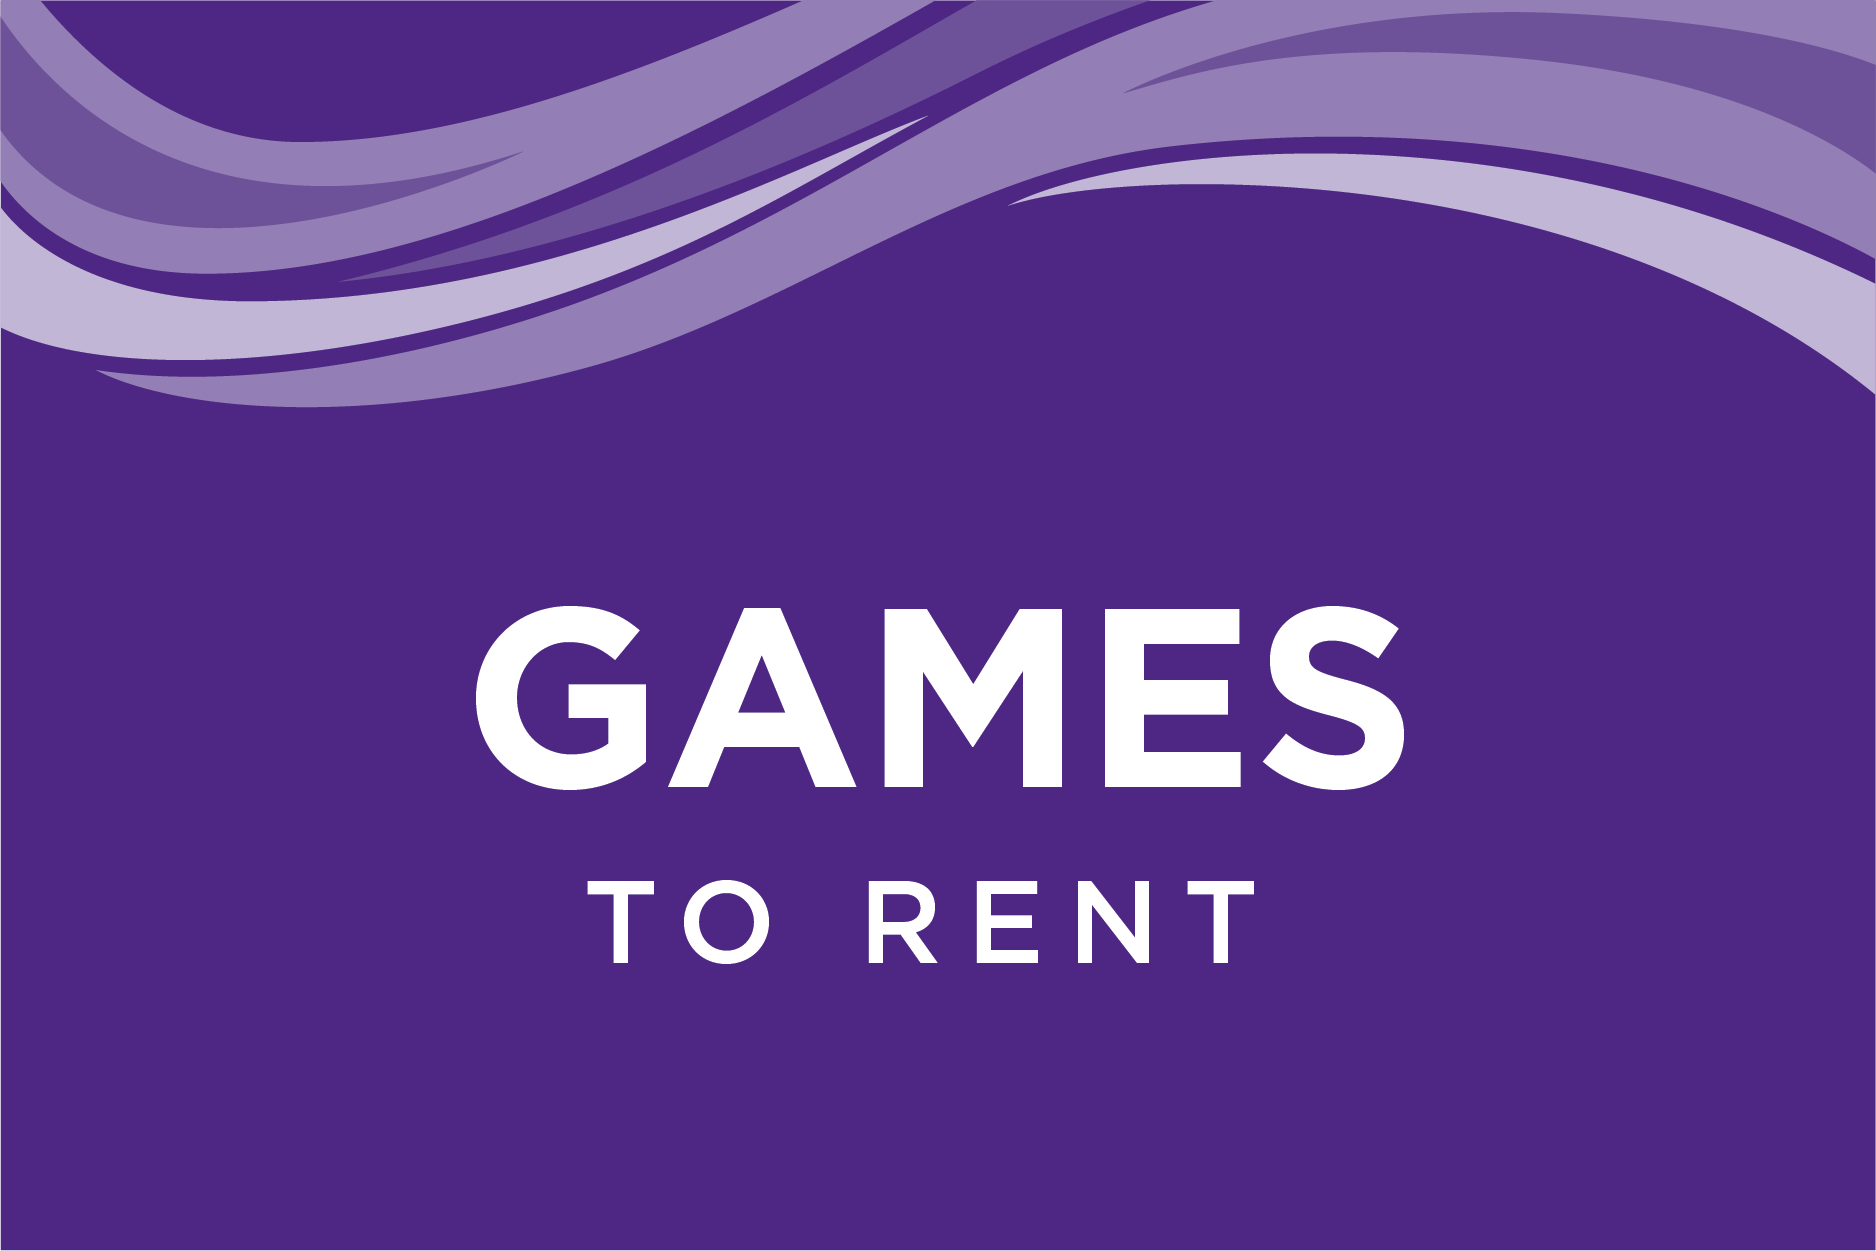 Games to play or rent at UW-Whitewater